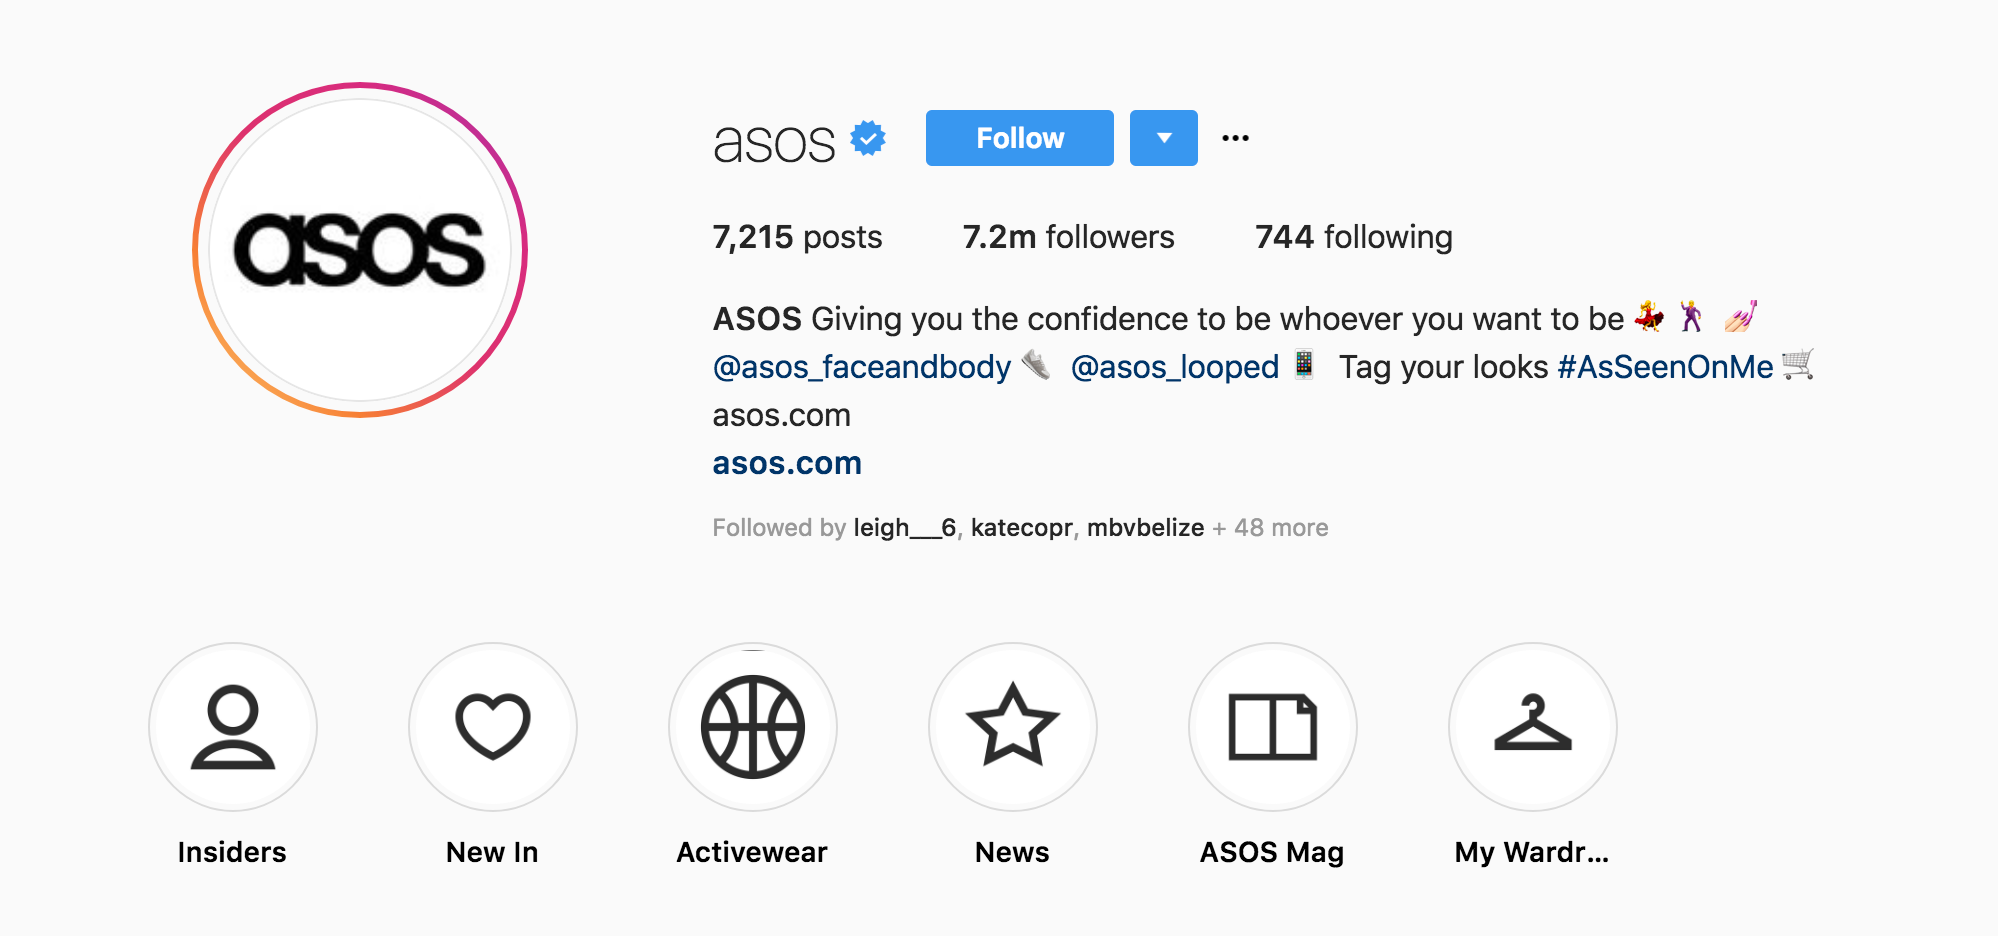 asos has a variety of instagram accounts for its various products and campaigns opening the first line of the bio are 2 social media profiles asos looped - instagram accounts by tag followers